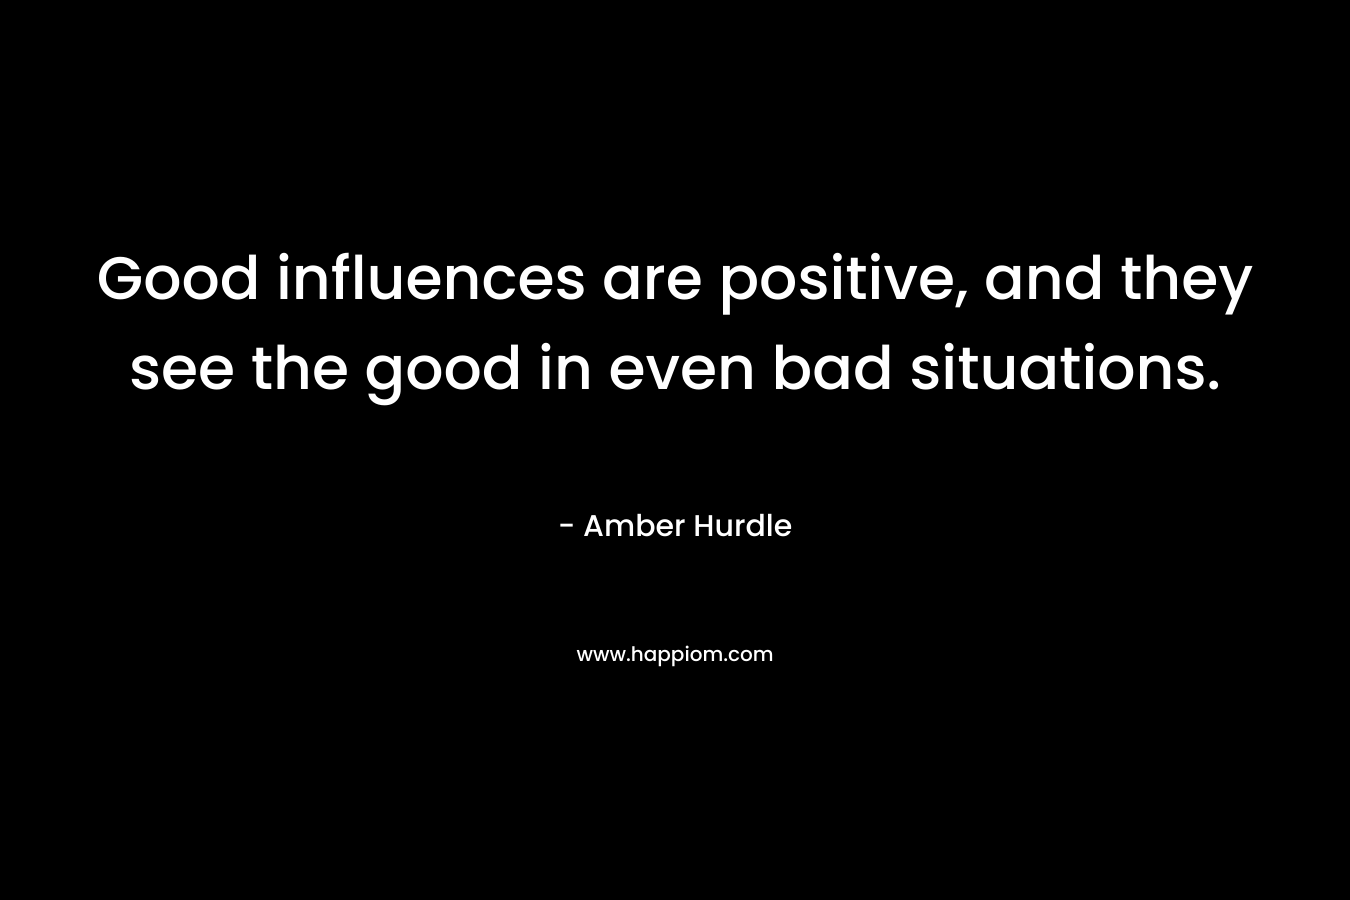 Good influences are positive, and they see the good in even bad situations. – Amber Hurdle